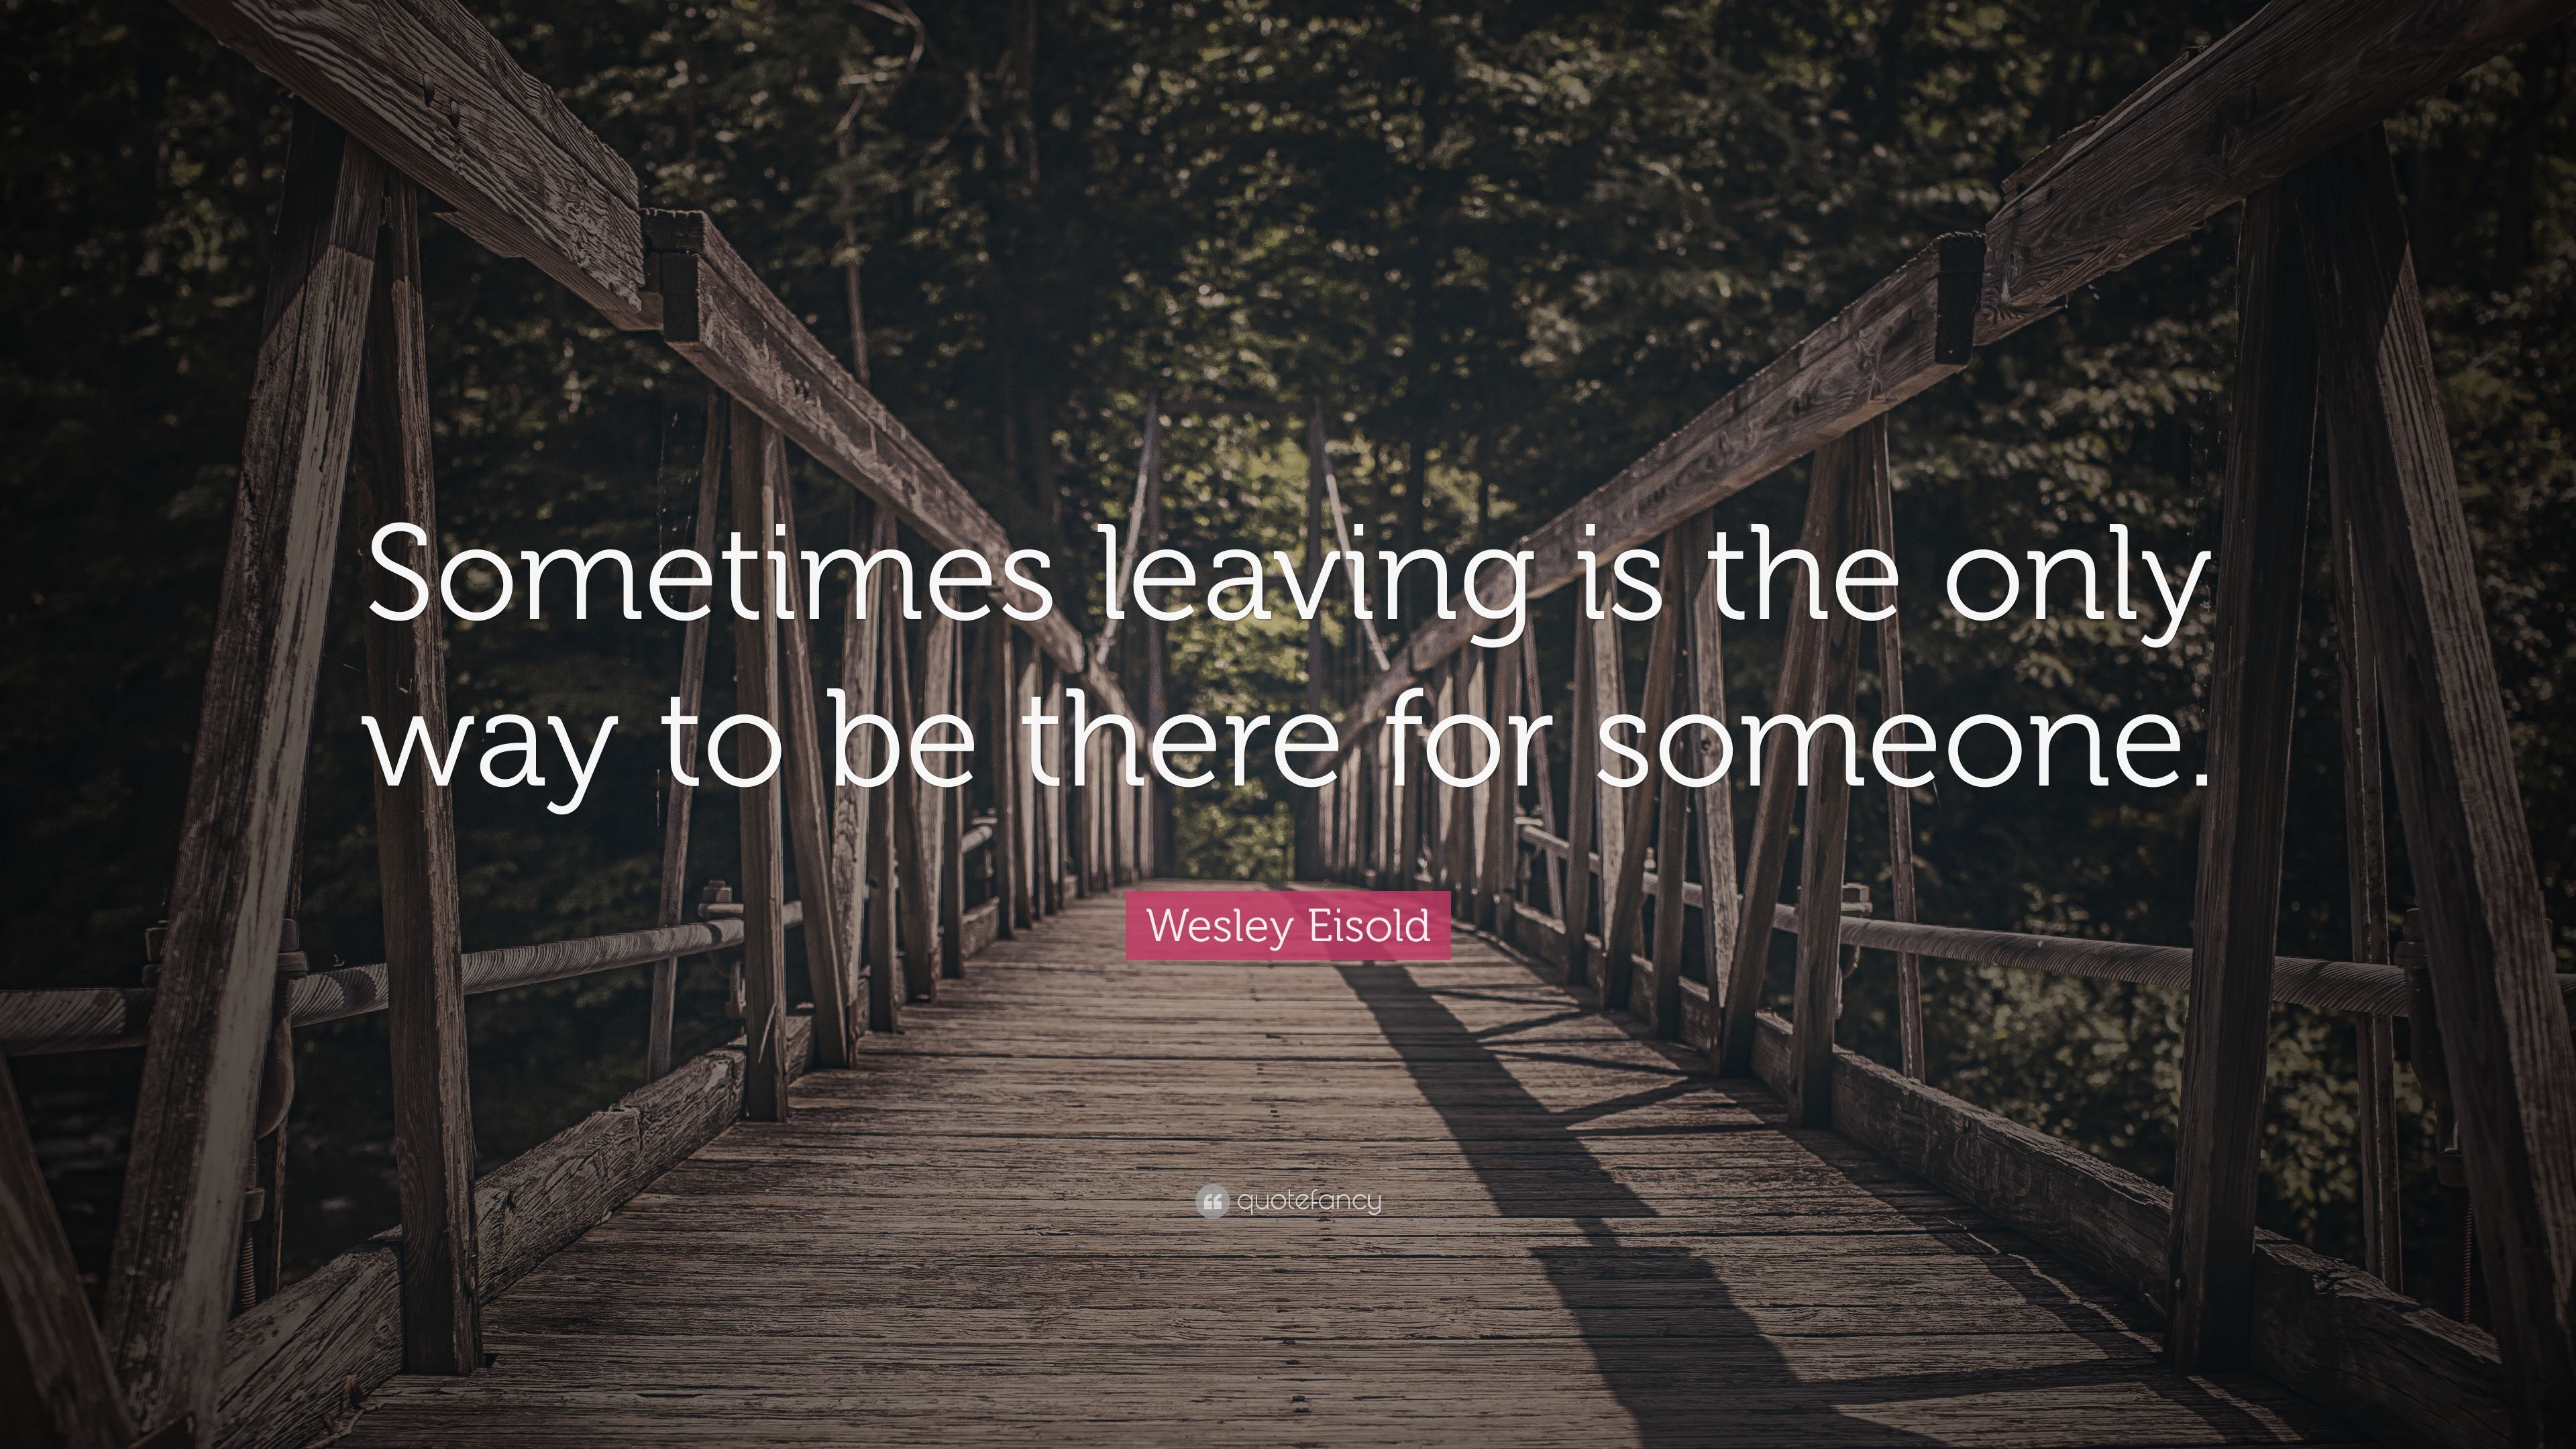 Wesley Eisold Quote: “Sometimes leaving is the only way to be there for someone.” (7 wallpaper)